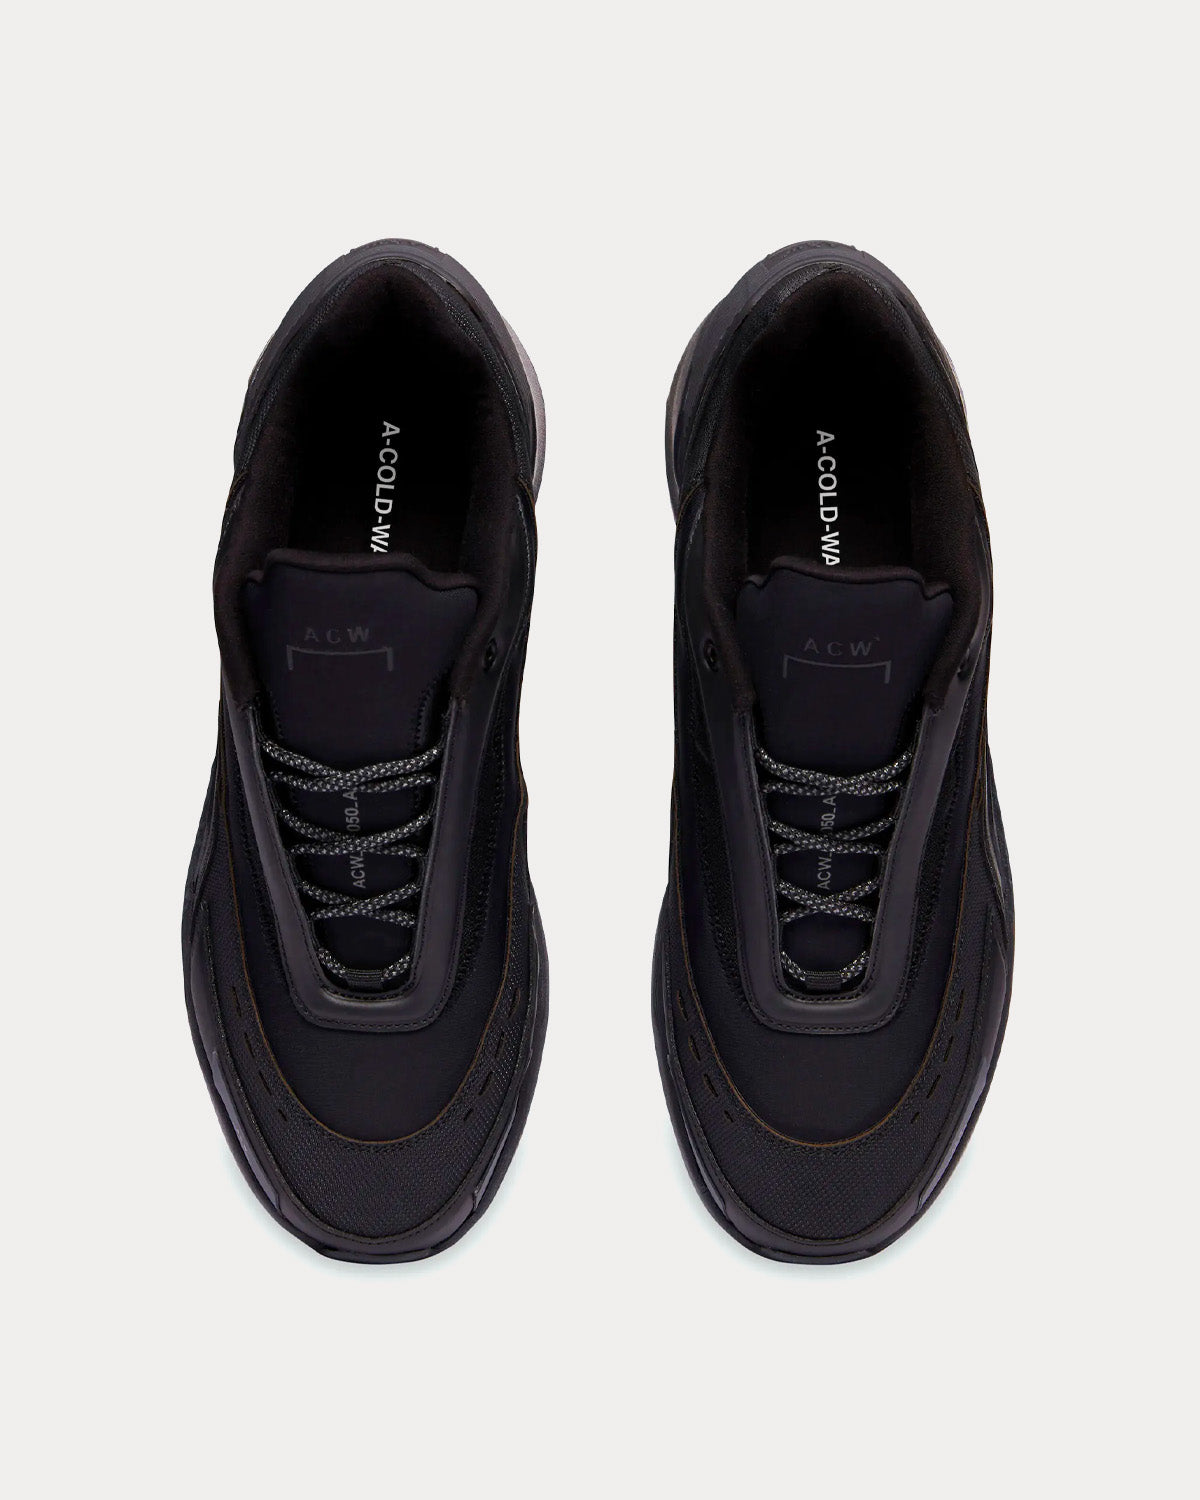 A-COLD-WALL* - Vector* Runner Black Low Top Sneakers